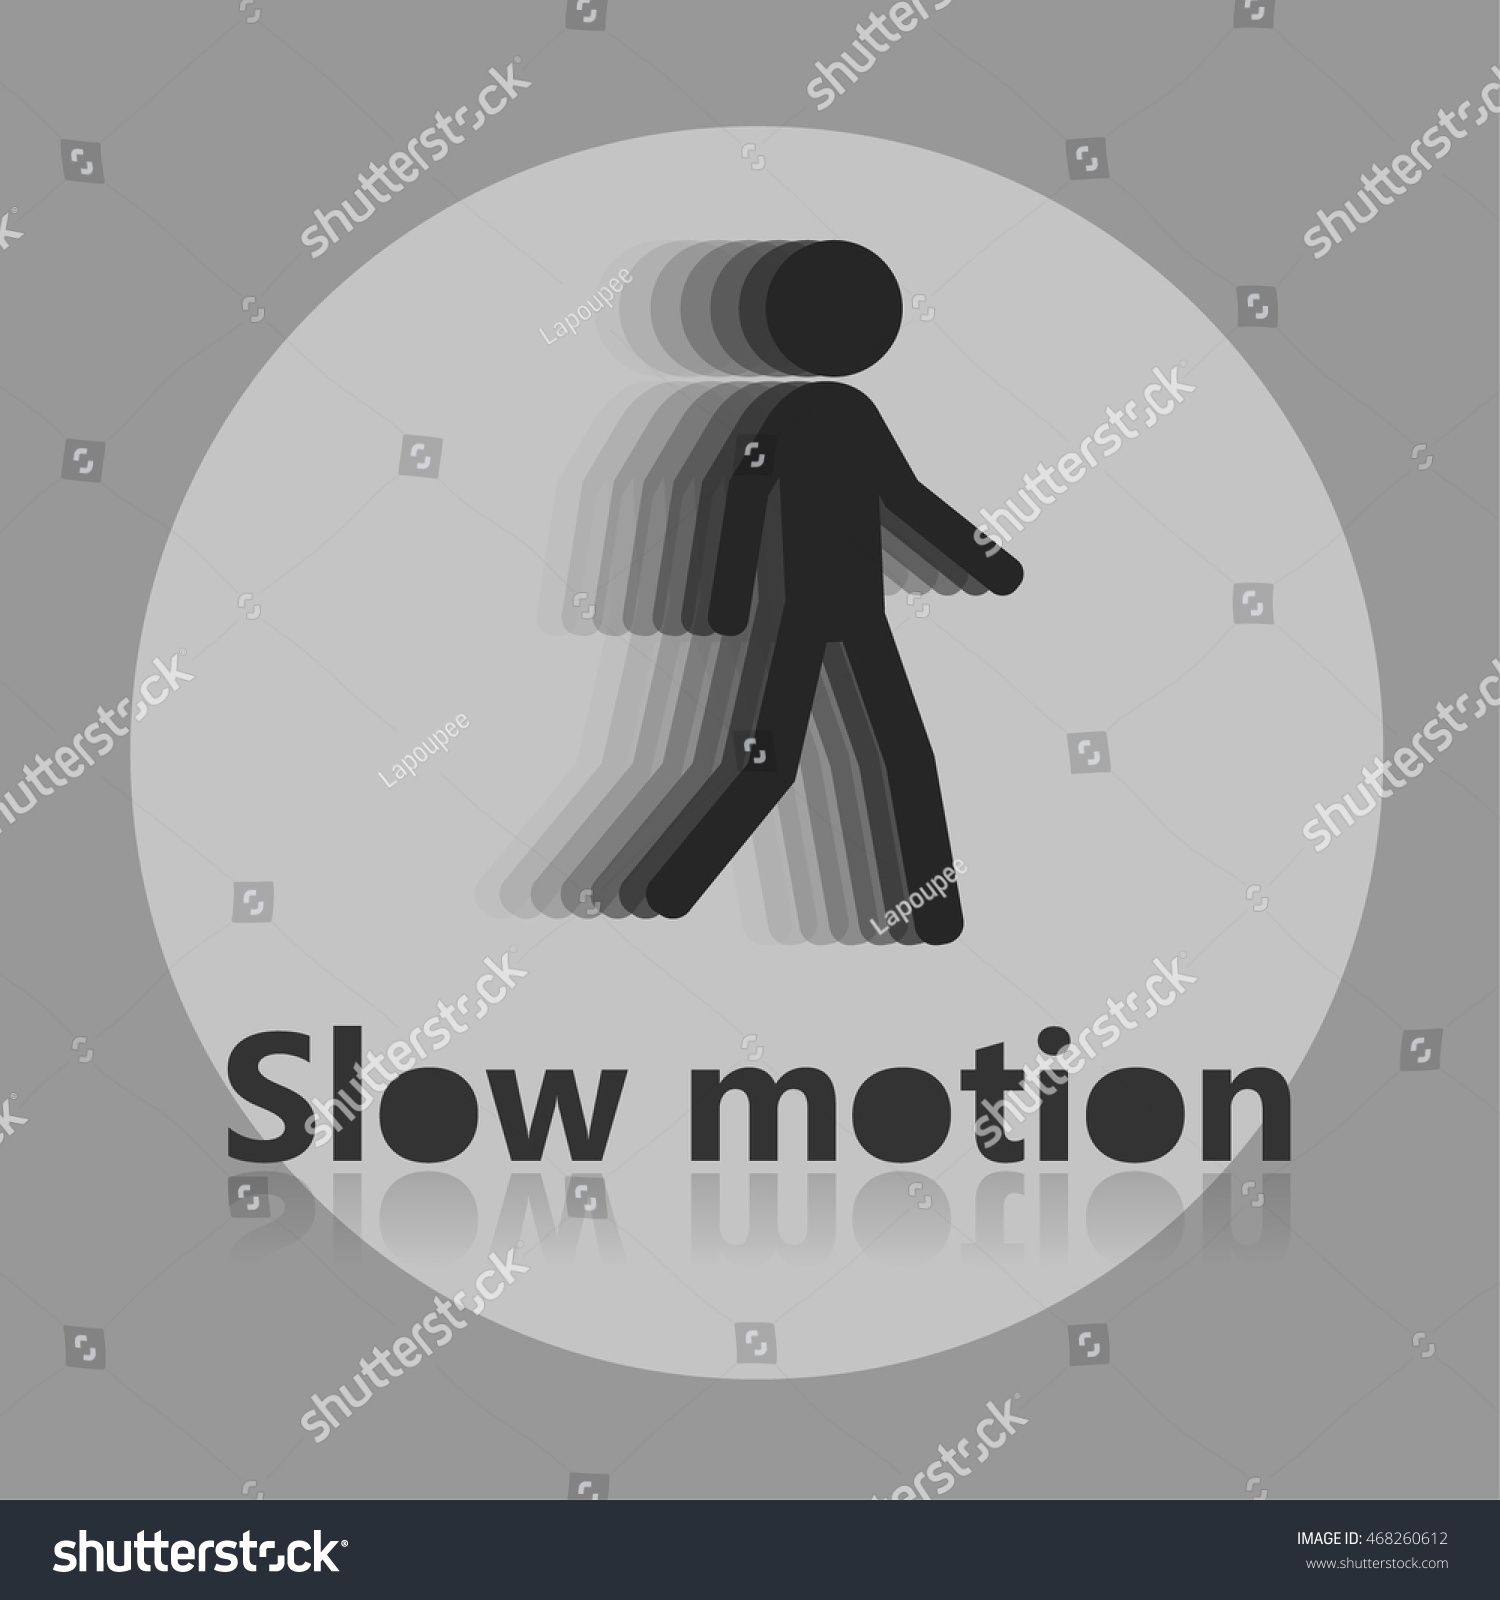 Slow Motion Icon Stock Vector (Royalty Free) 468260612